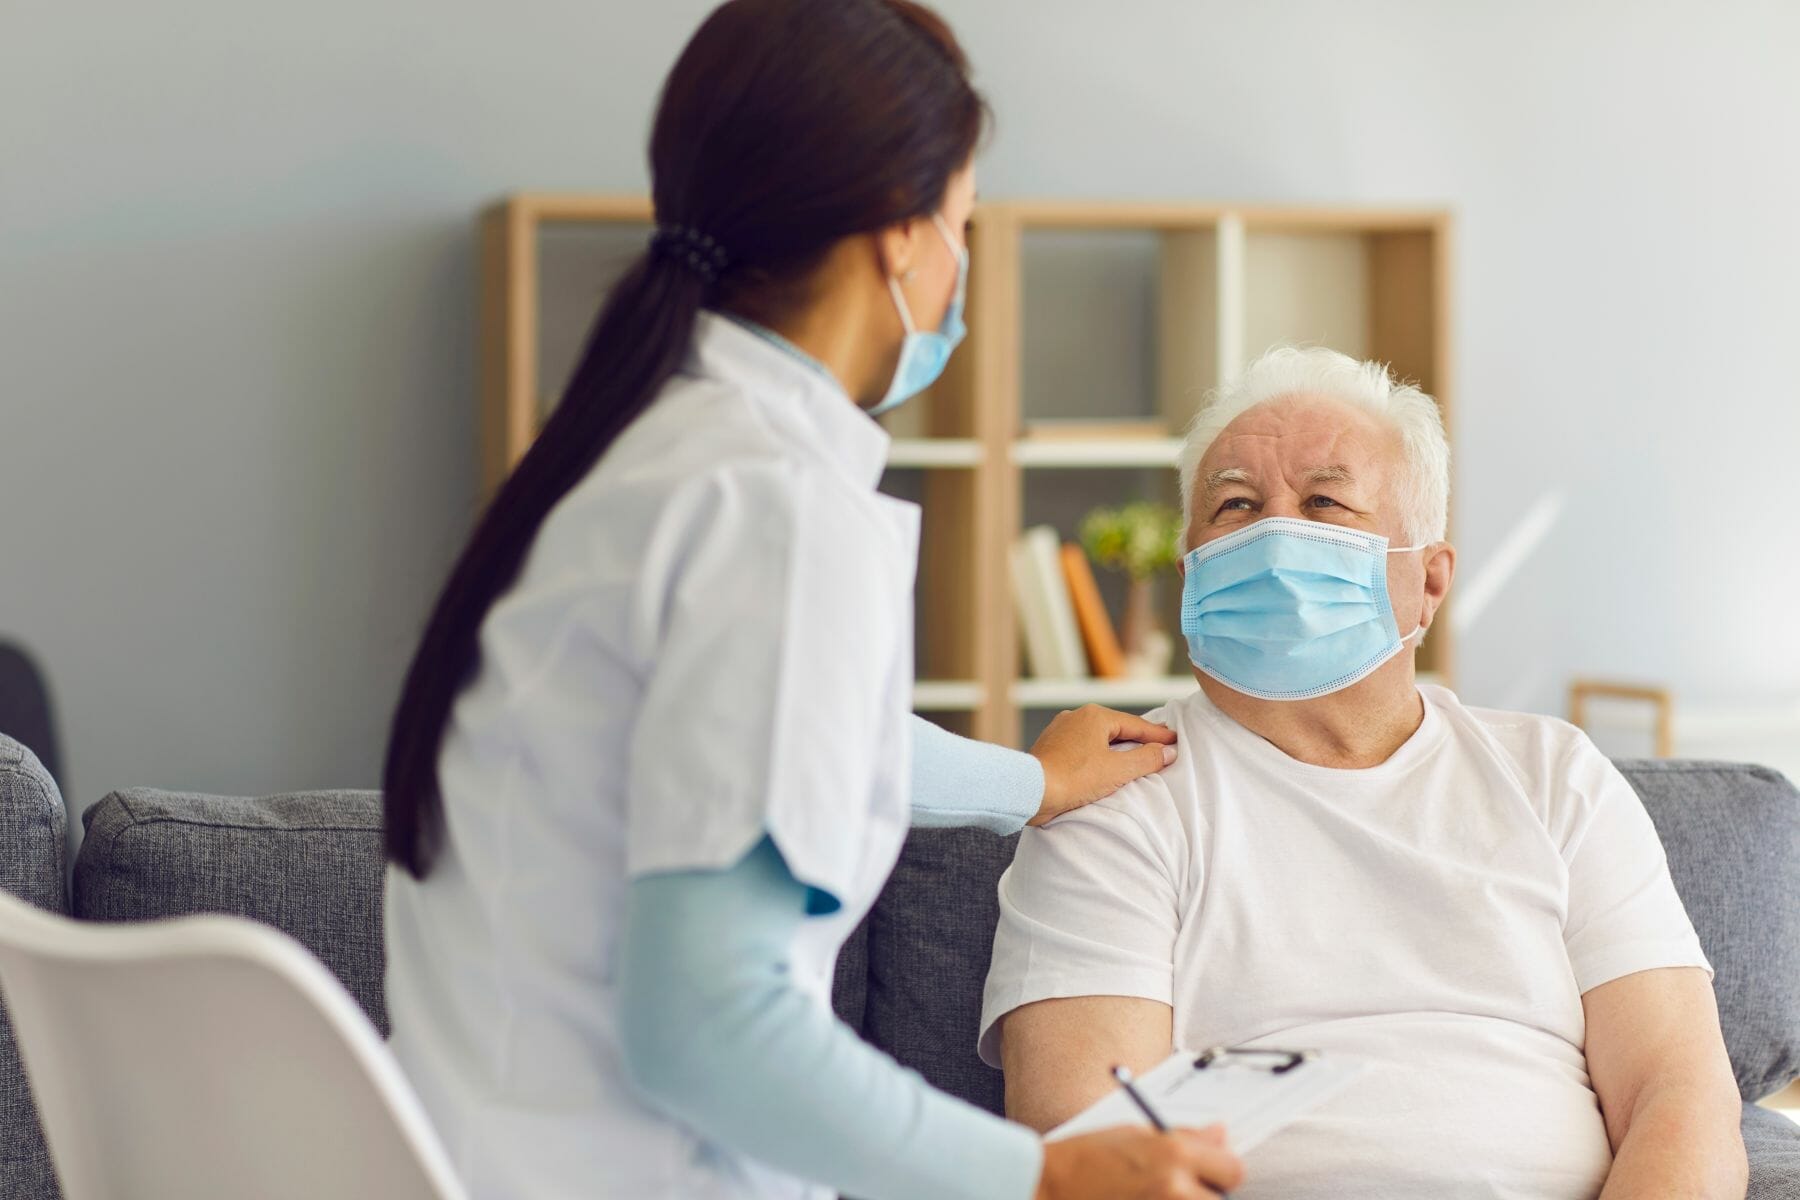 Caring female doctor supporting and cheering up senior male patient during home visit. Therapeutist and aged white-haired man, both wearing medical face masks, communicating and discussing treatment